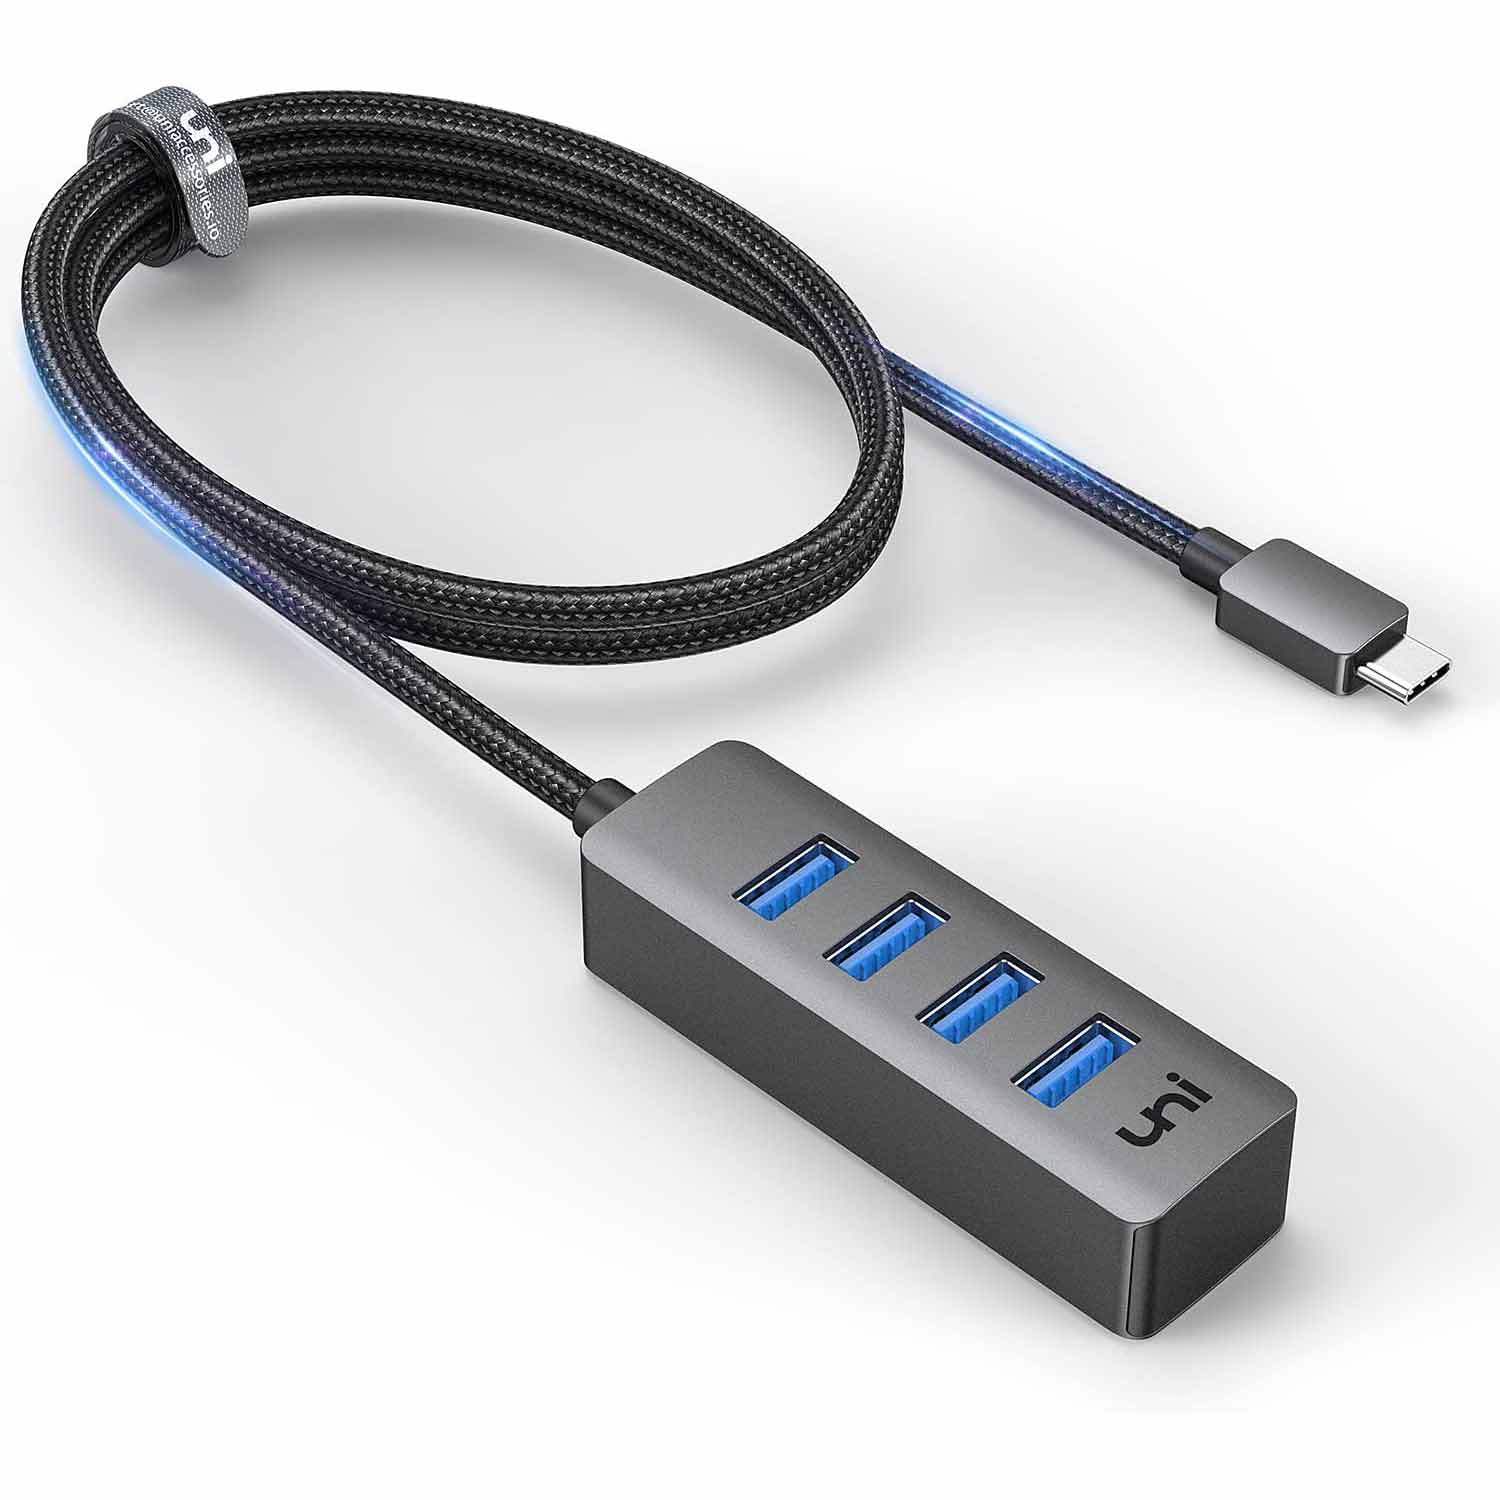 USB C to 4 USB 3.0 with 4ft Extended Cable Version